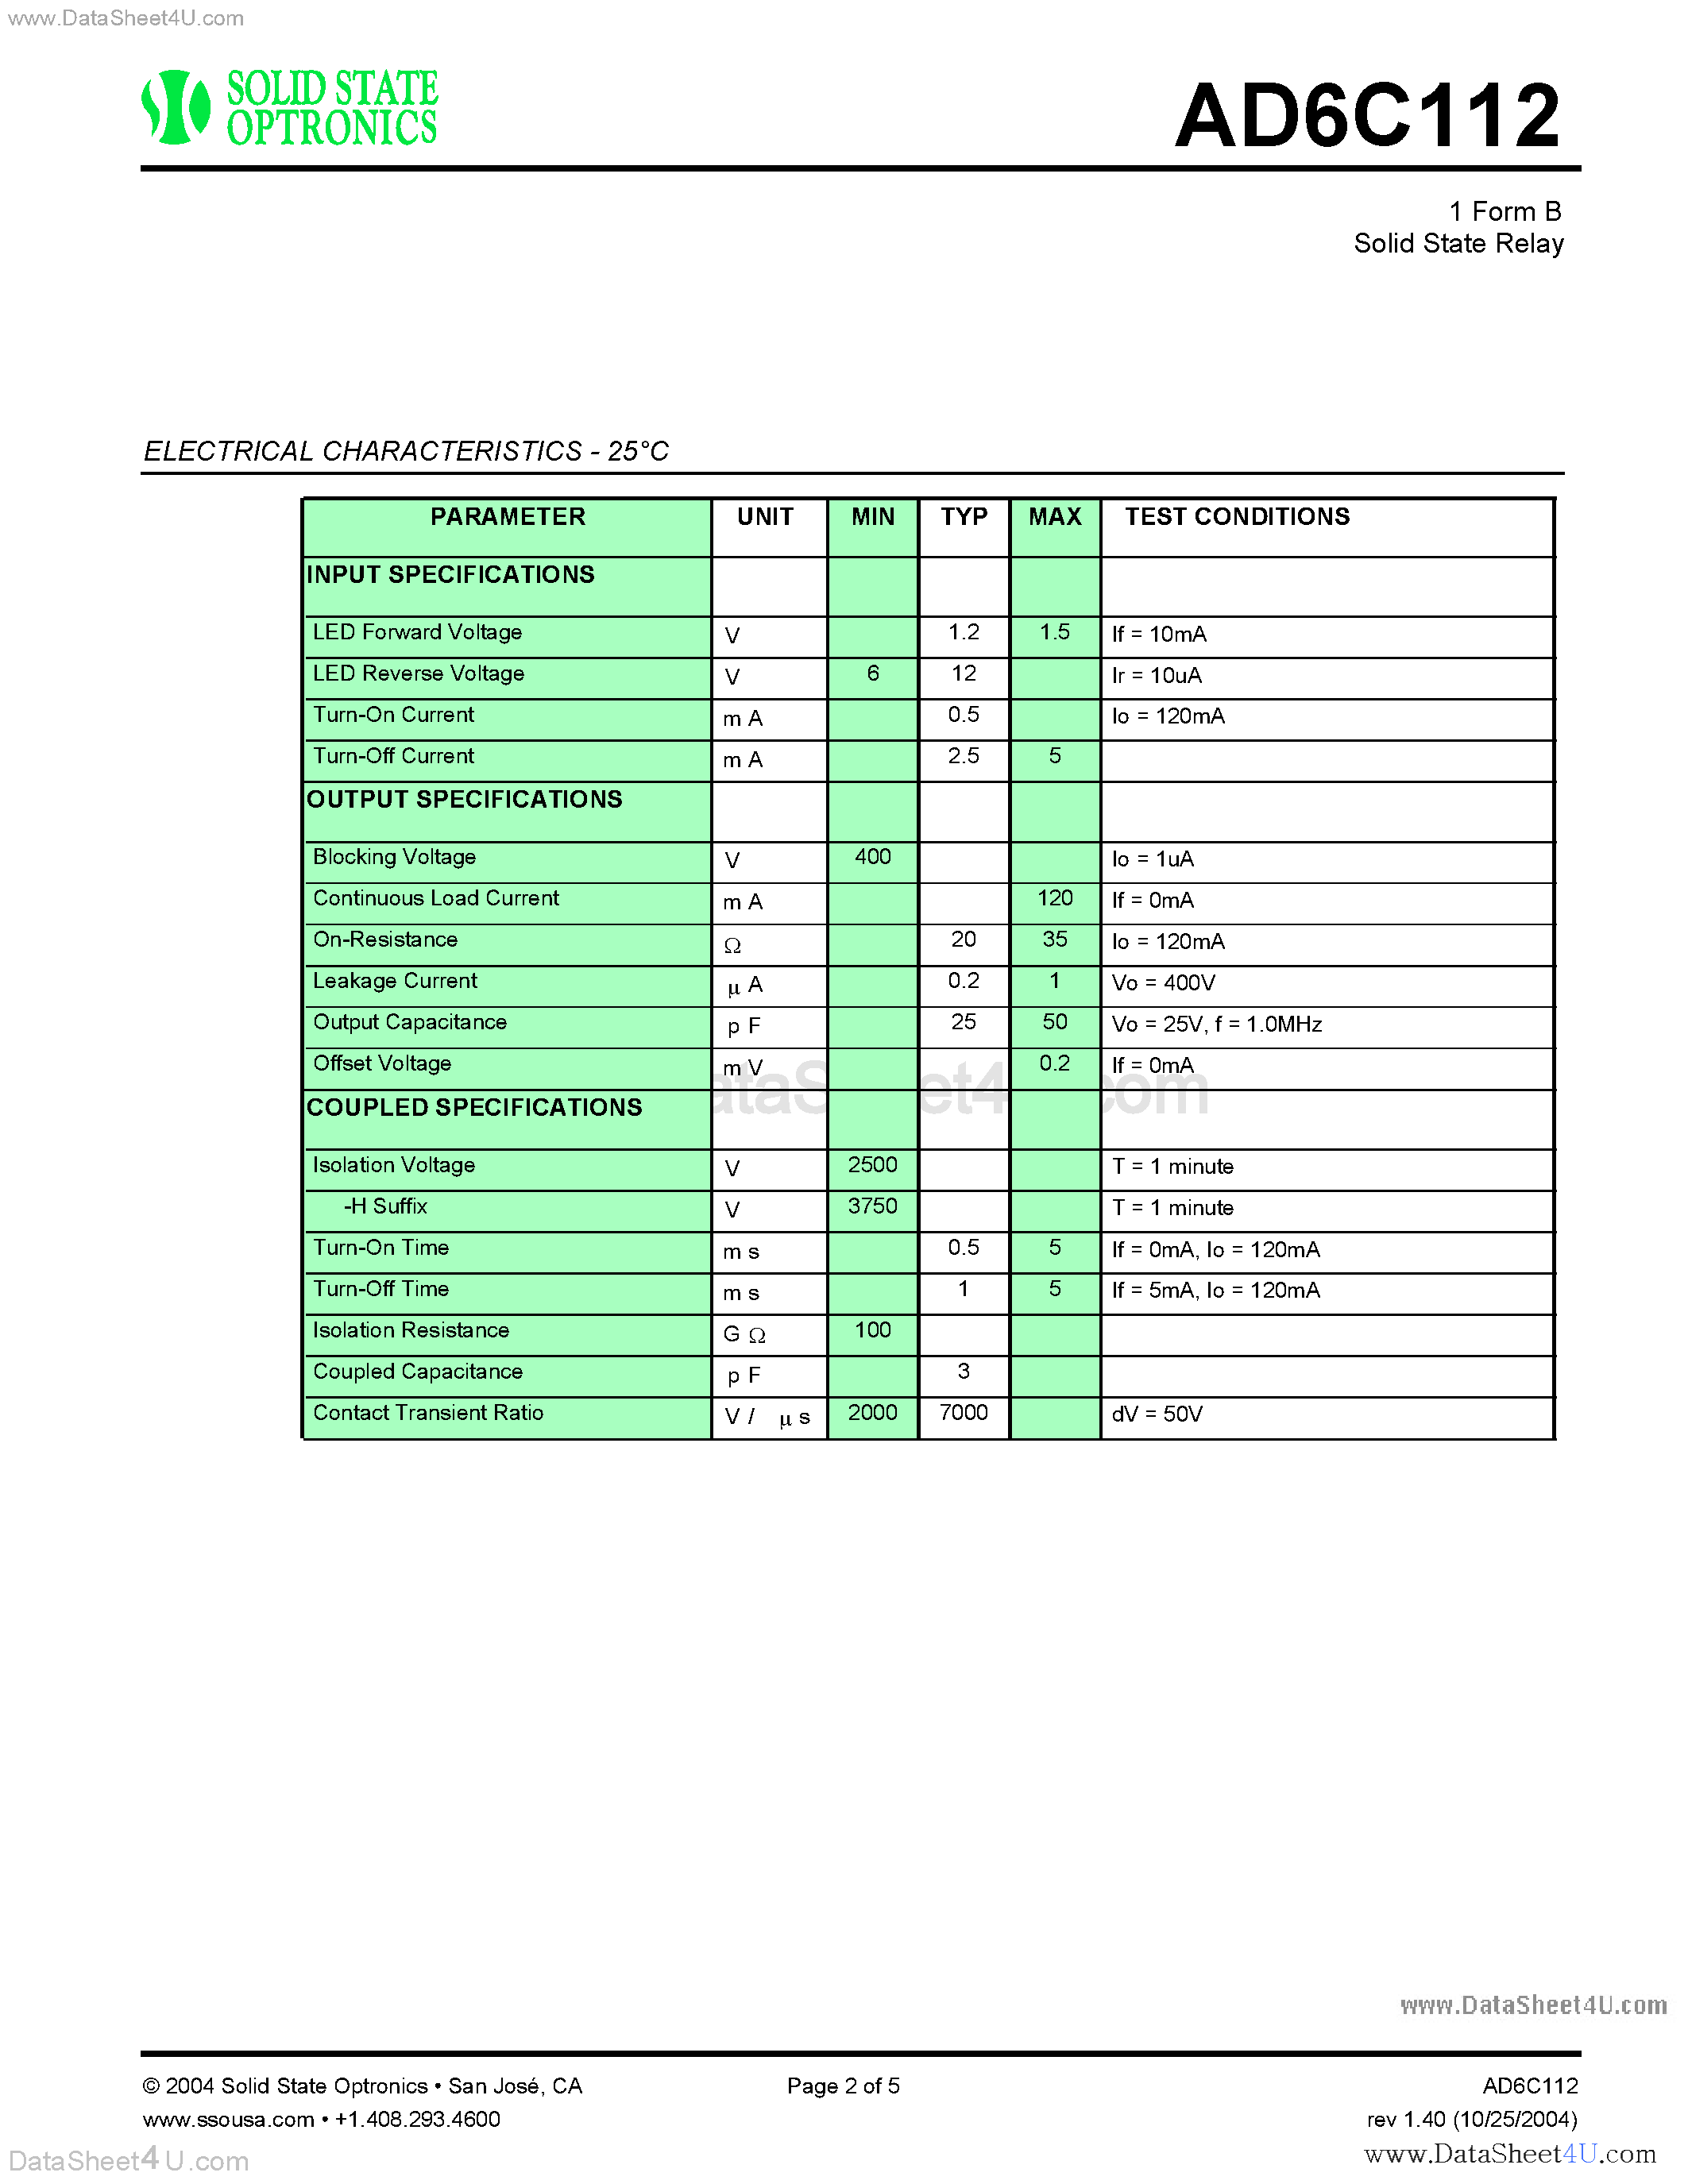 Datasheet AD6-C112 - Relay page 2